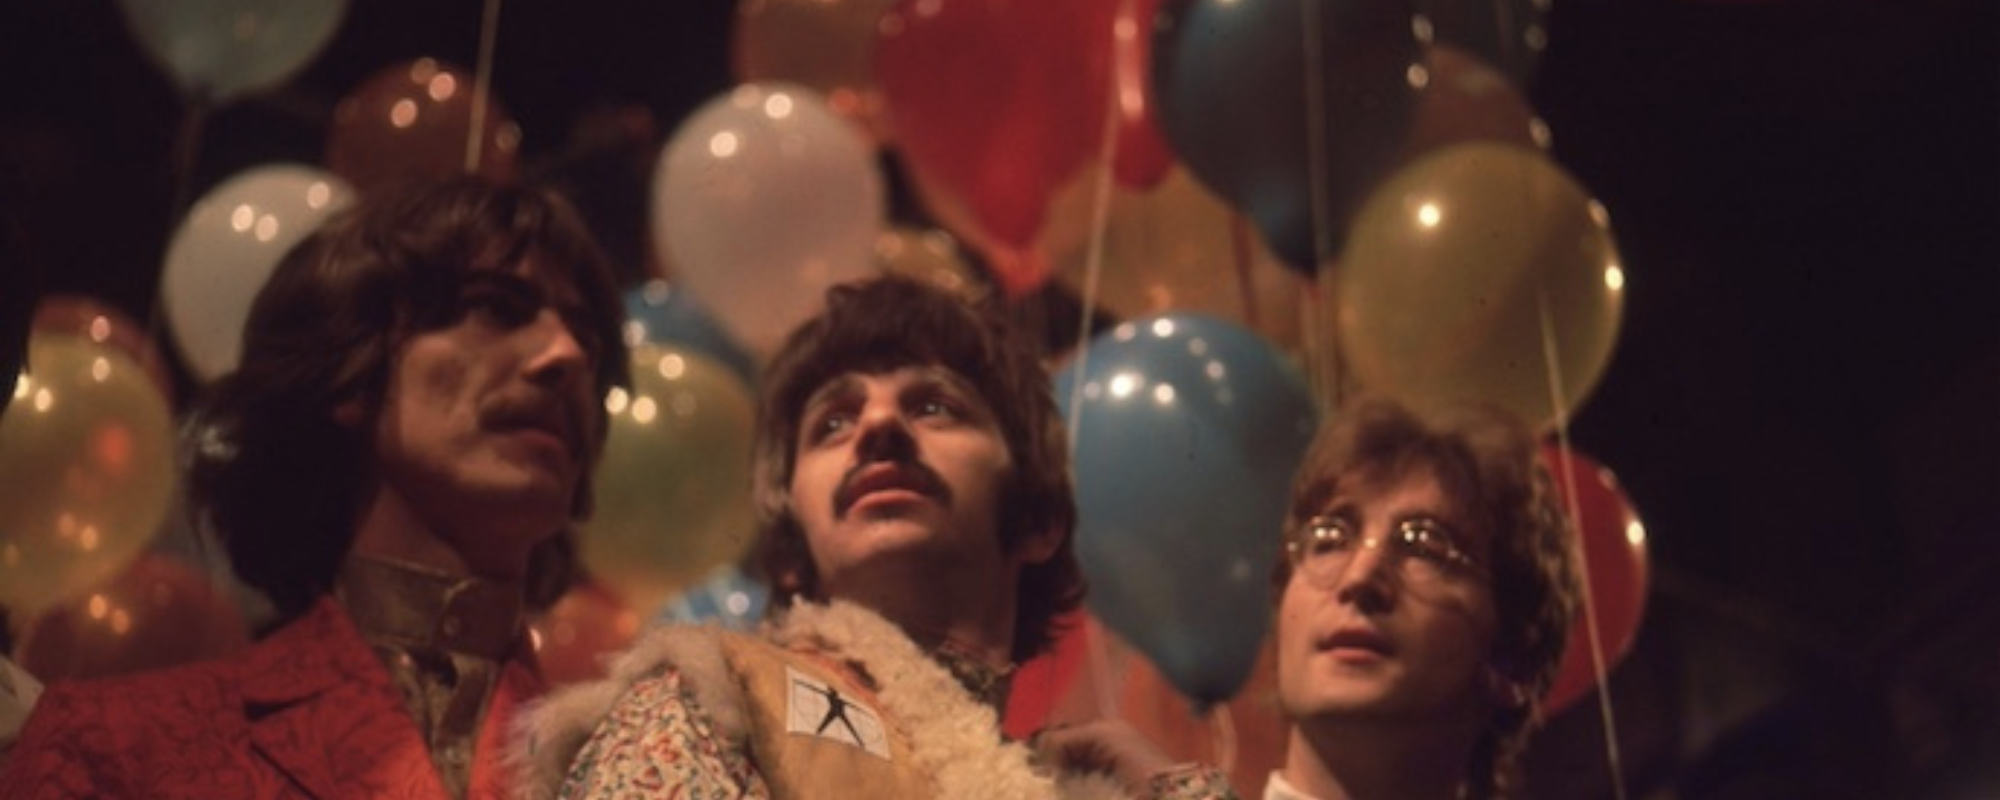 New Year’s Eve Playlist: 4 Classic Rock Songs About Newness & Rebirth